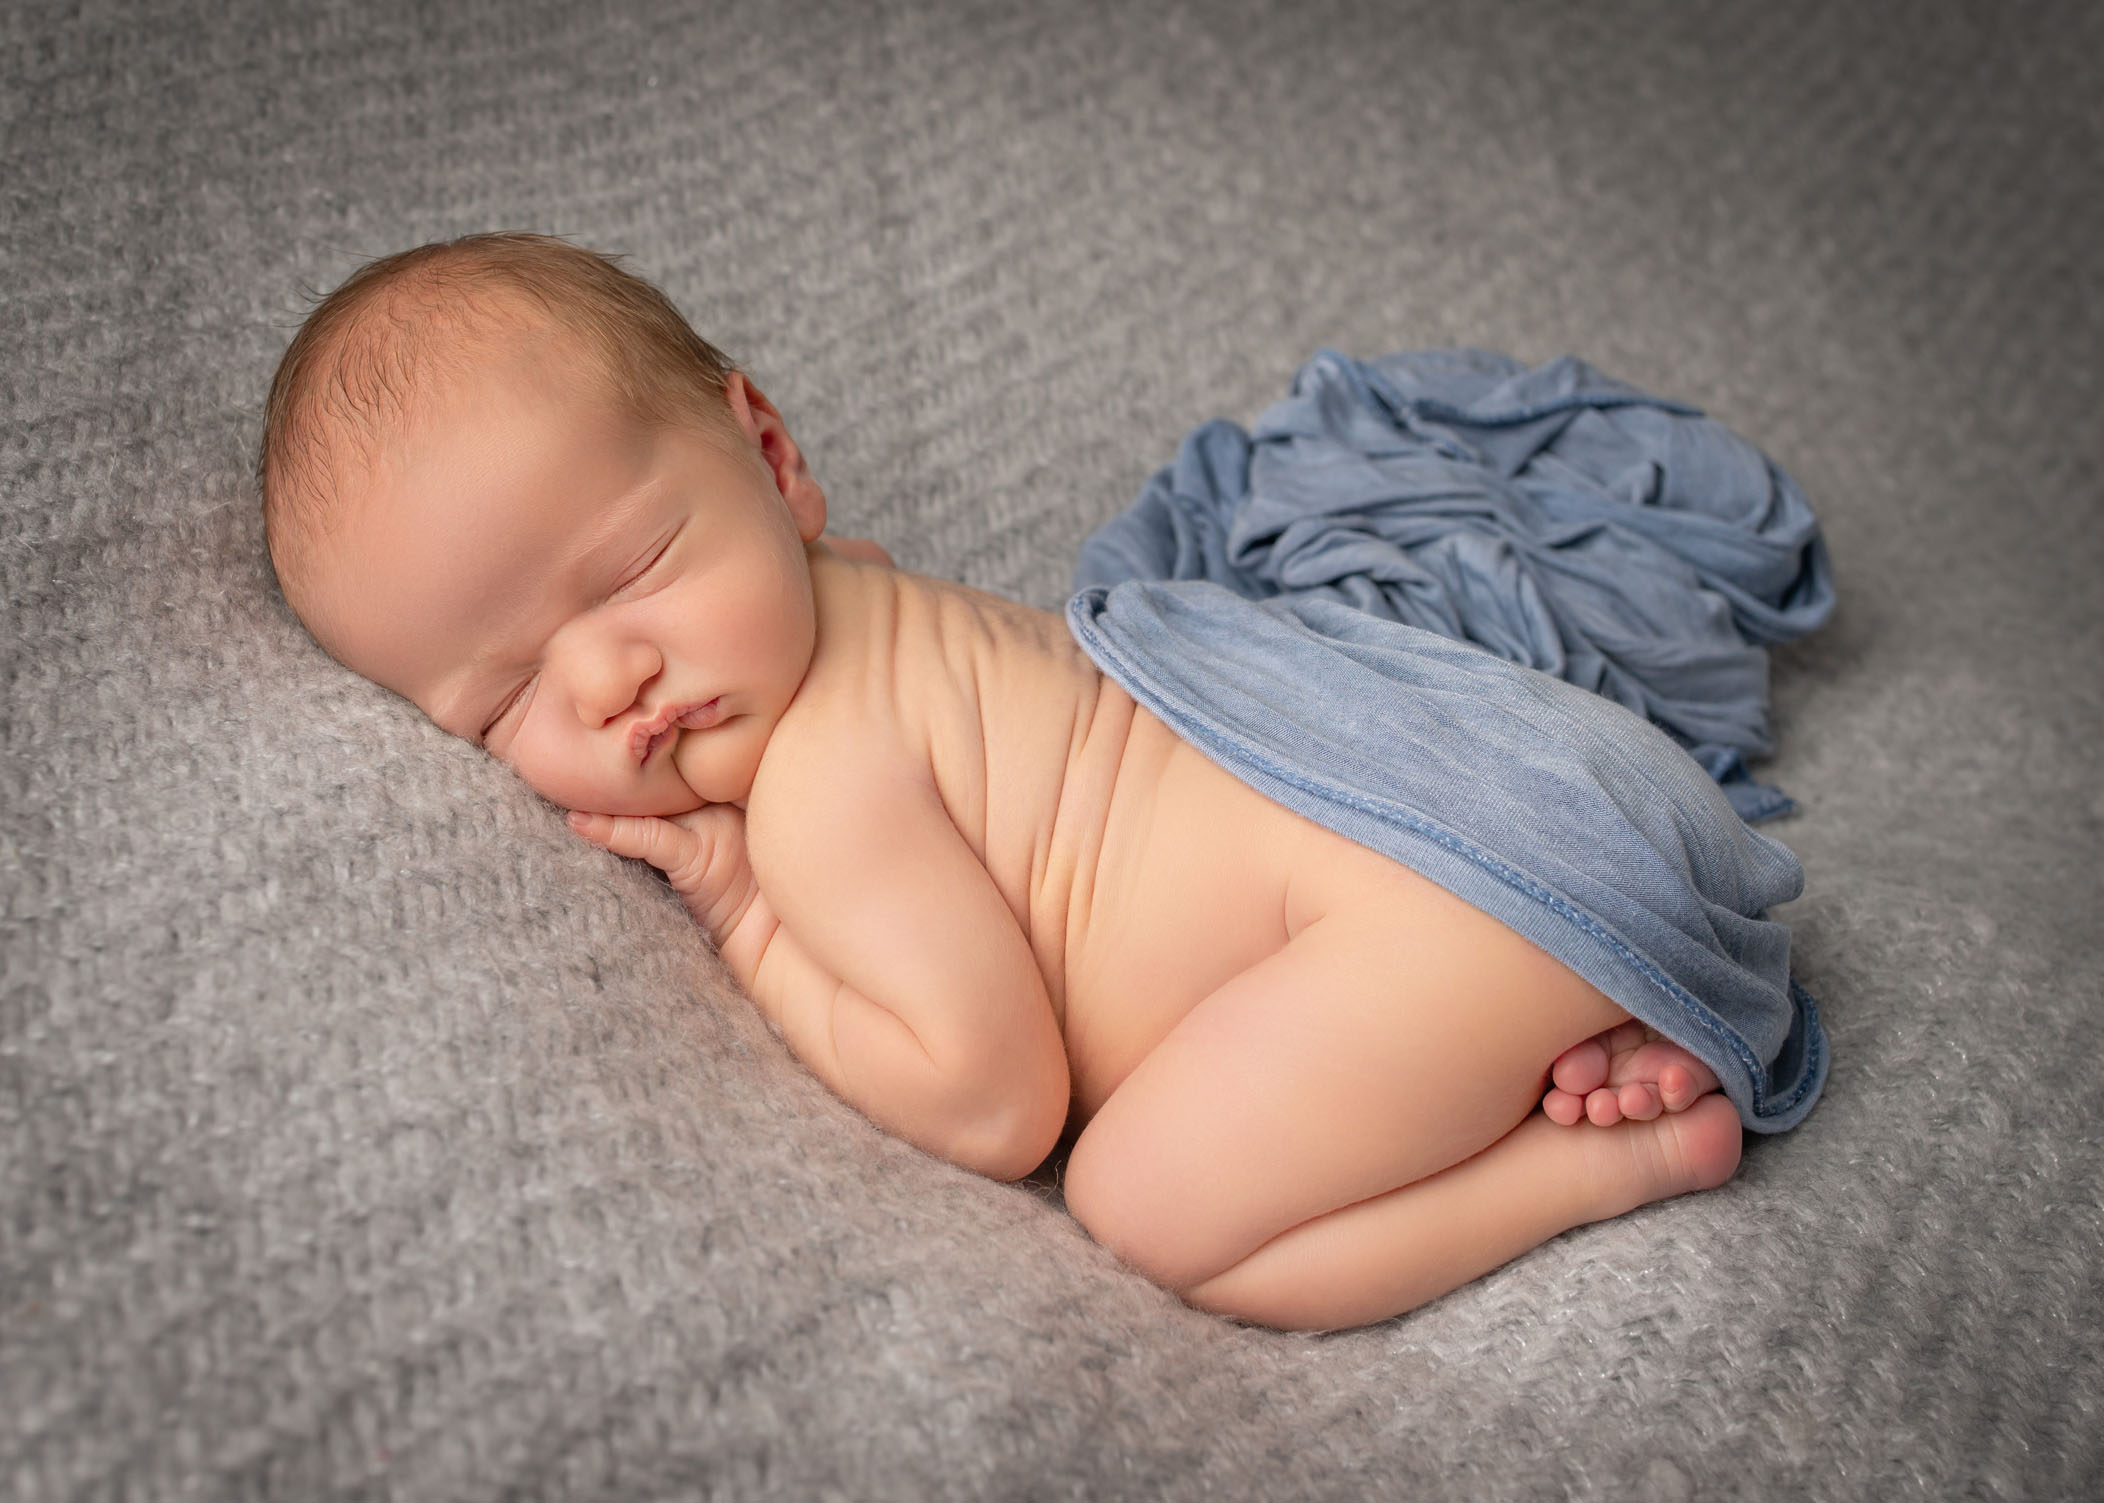 Newborn baby boy sleeping on grey blanket in bum up pose with blue wrap over his bottom